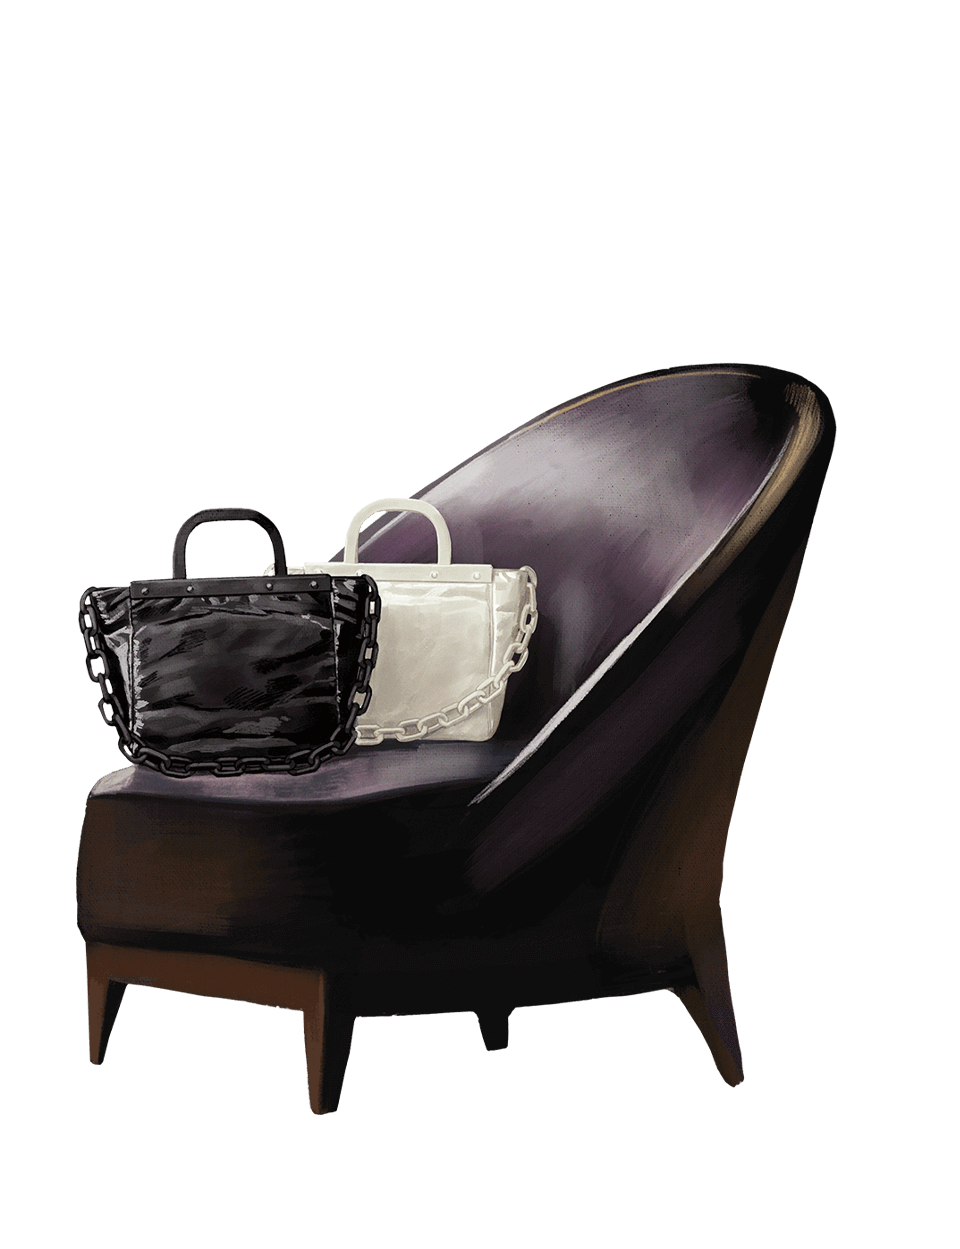 Women’s large patent tote bag in black and white – CHARLES & KEITH - Mobile - Chair